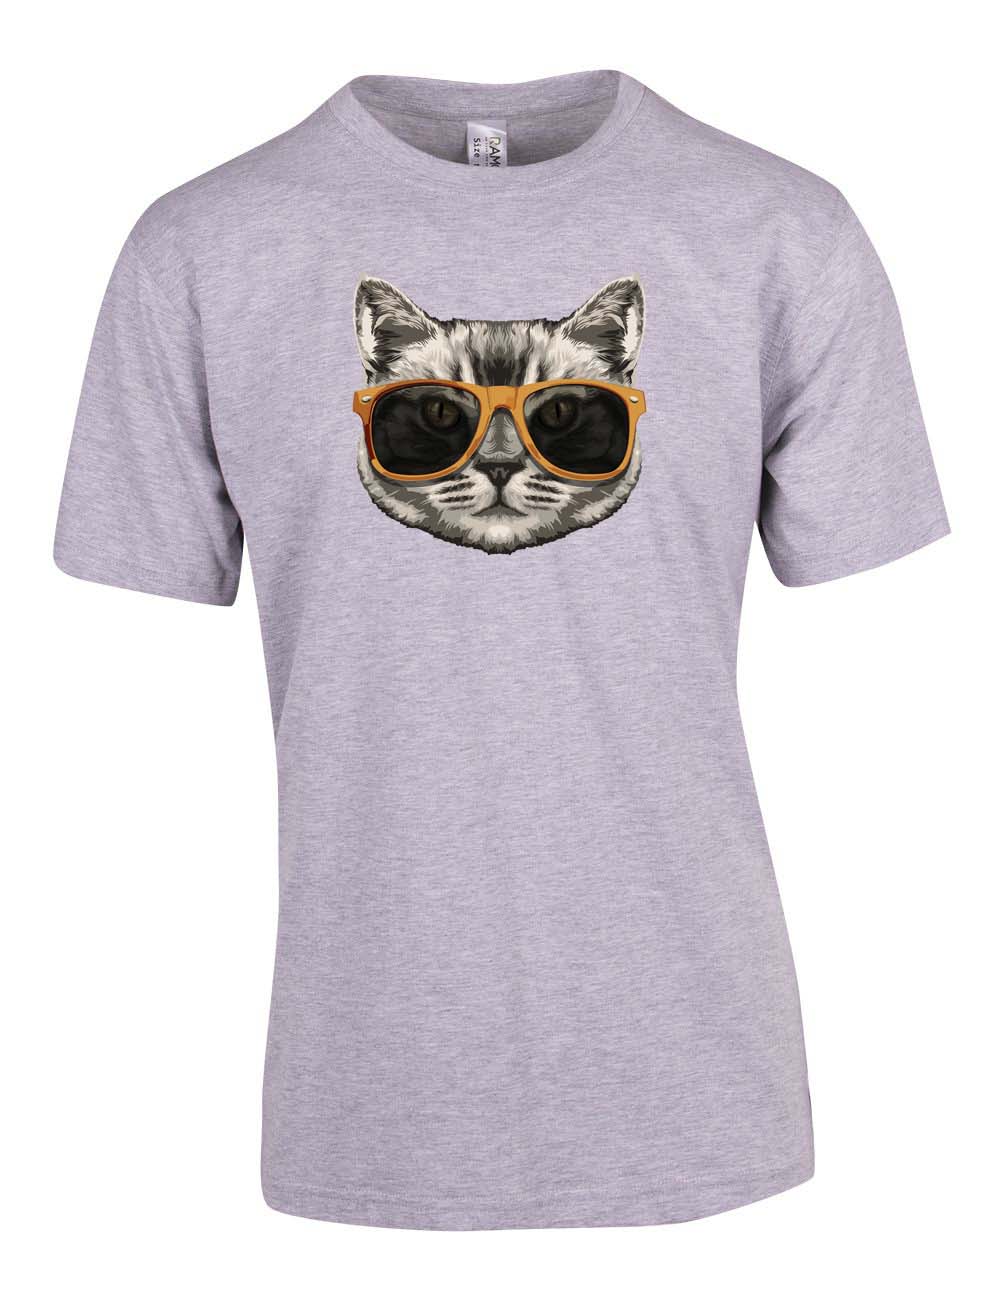 Perth Animal Rescue - Cat with Glasses logo Double sided T-Shirt